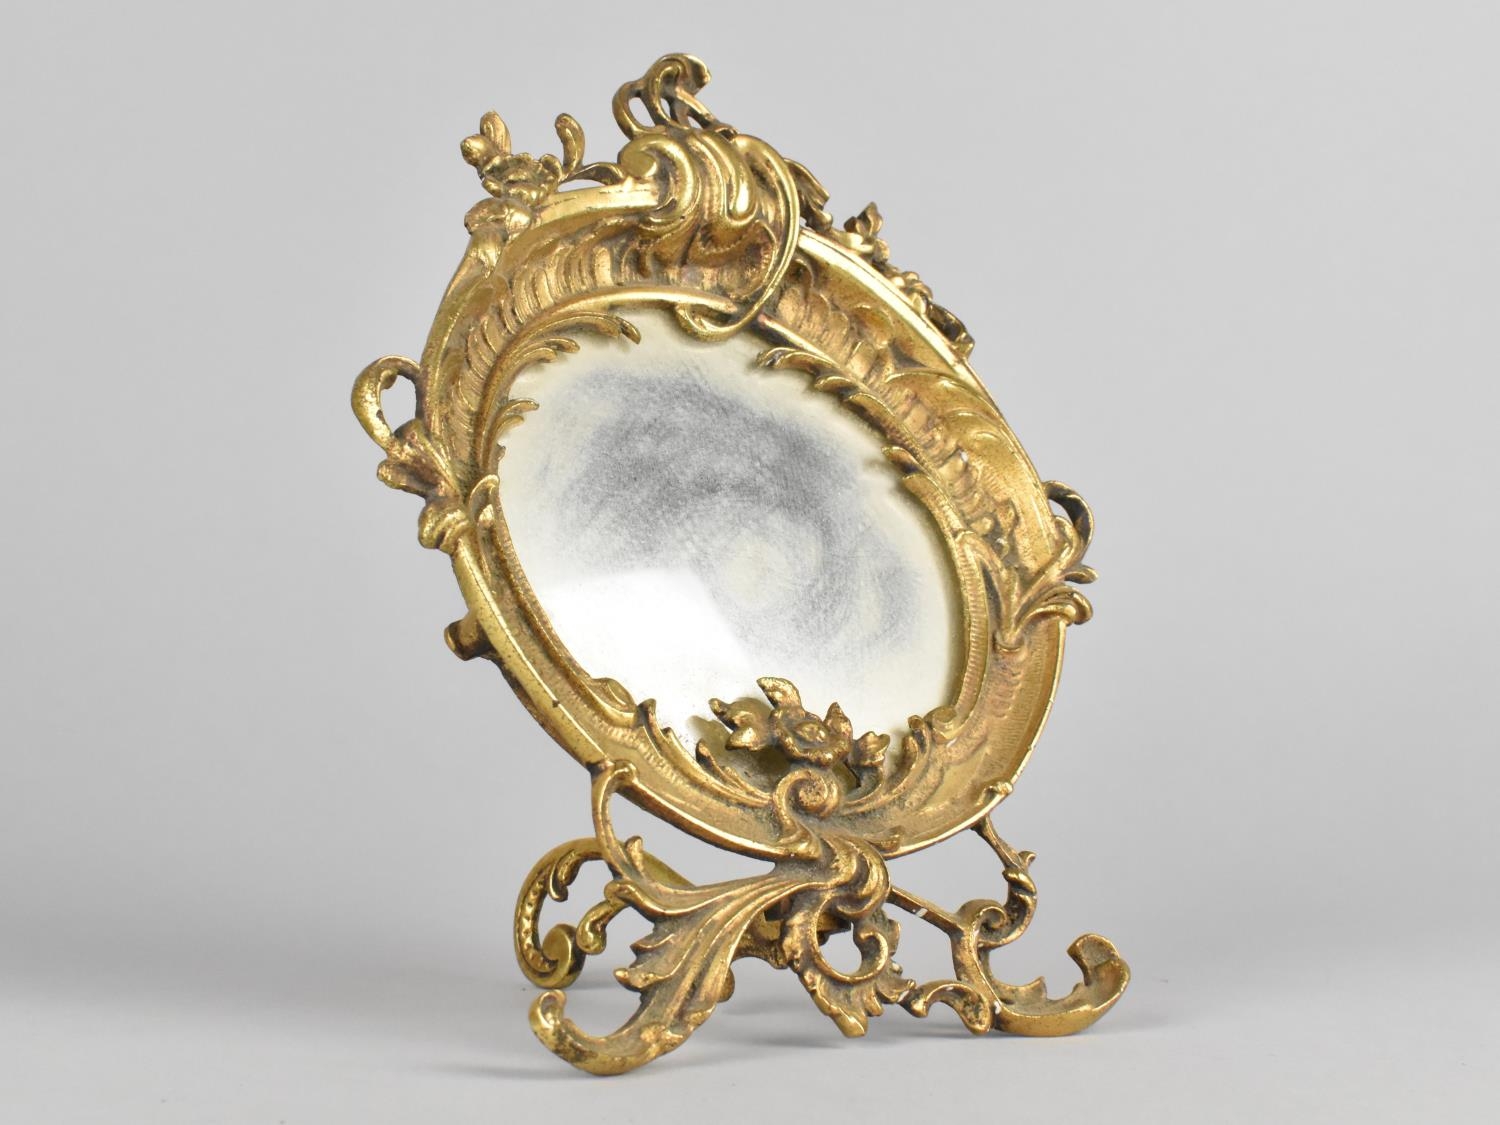 A Small Ornate Cast Brass Dressing Table Mirror of Circular Form with Floral and Scrolled